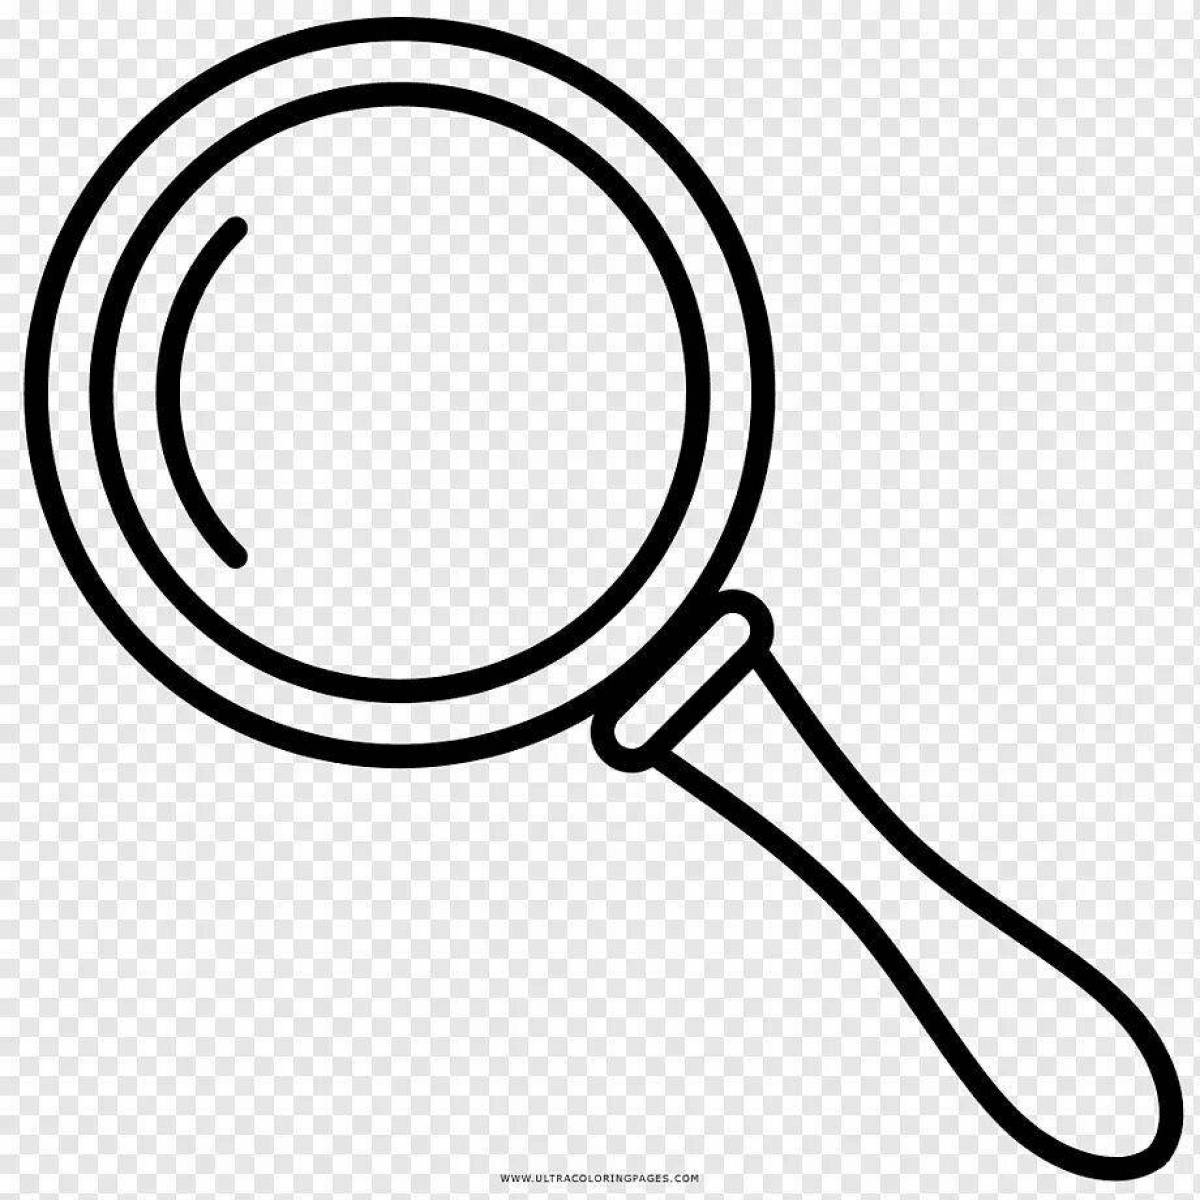 Ornate Magnifying Glass Coloring Page